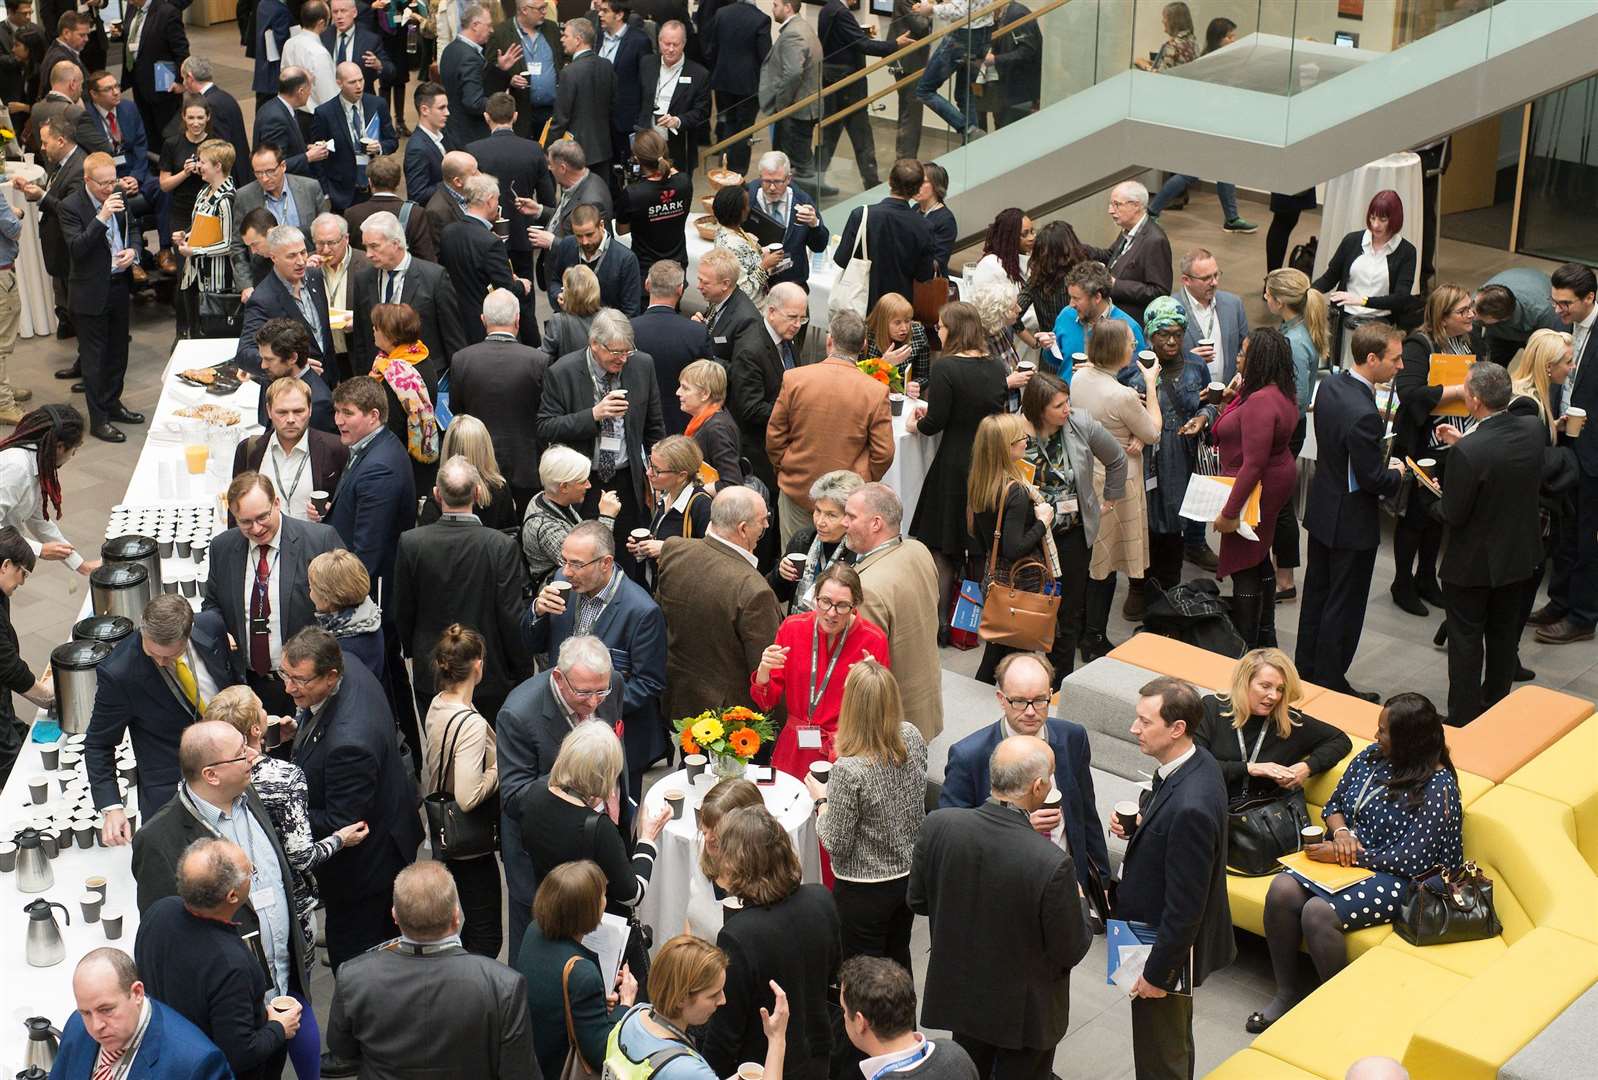 The summit is one of the county's leading networking events